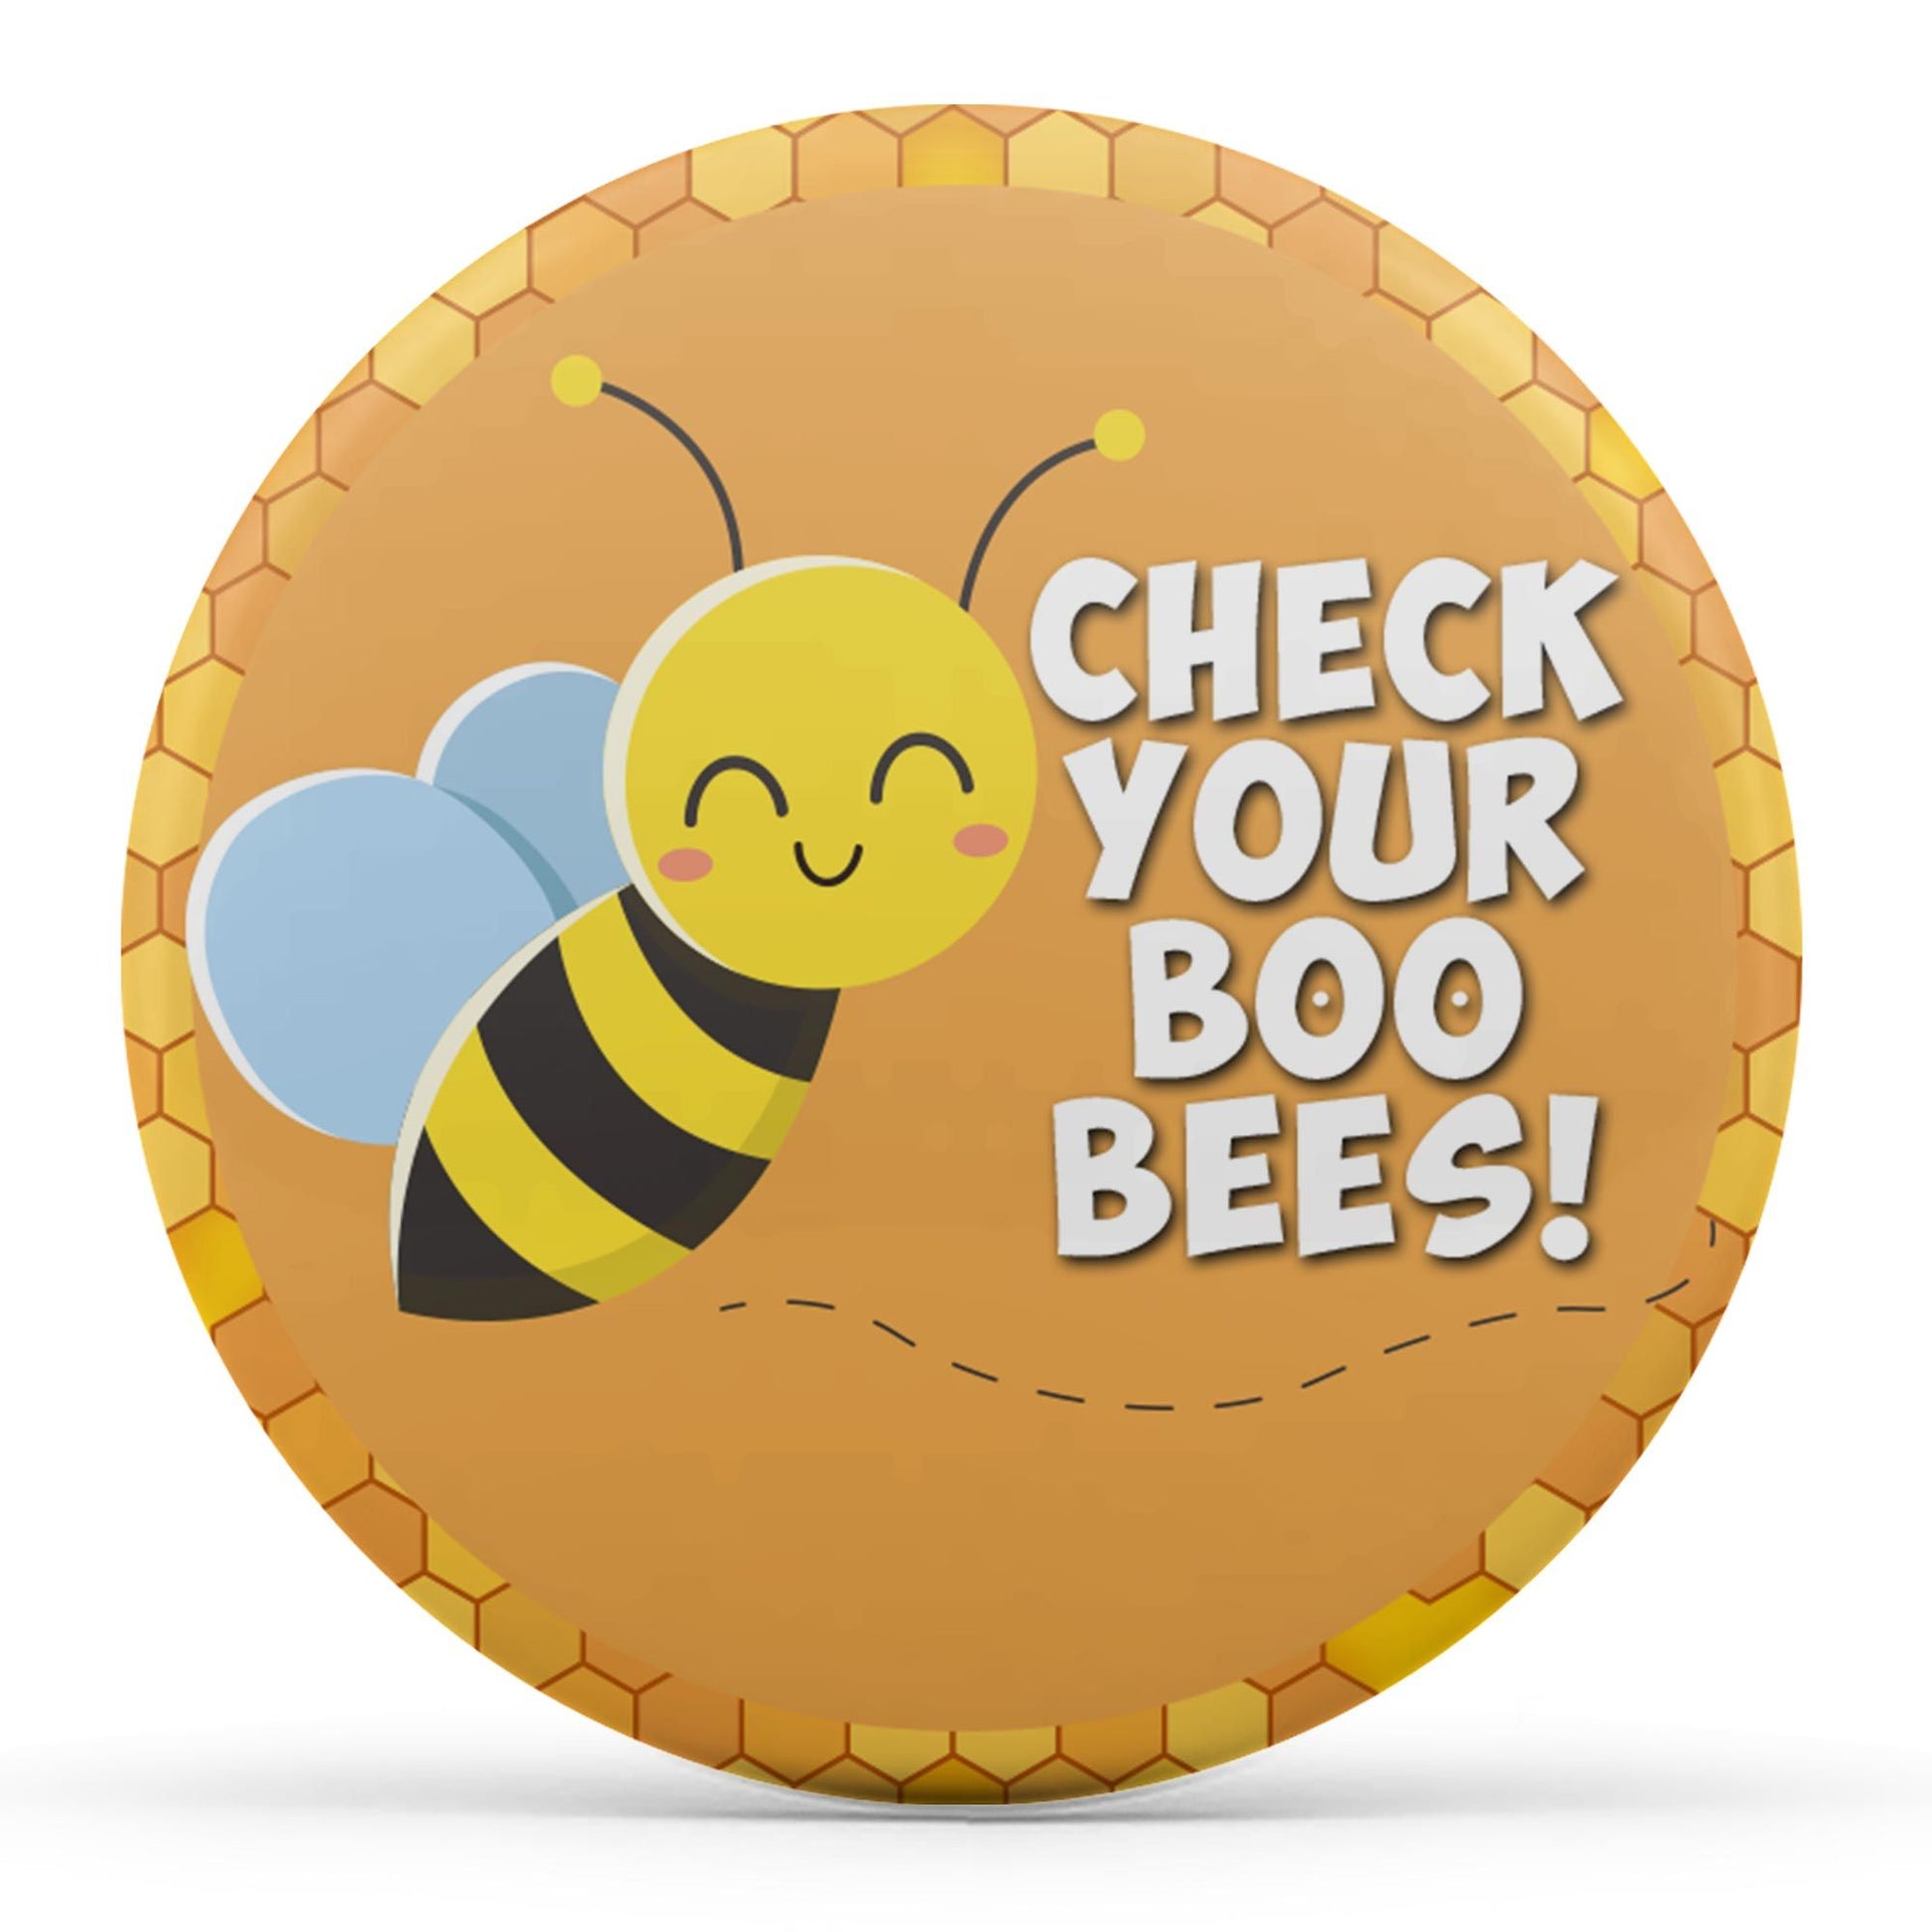 Check Your Boo Bees! Image